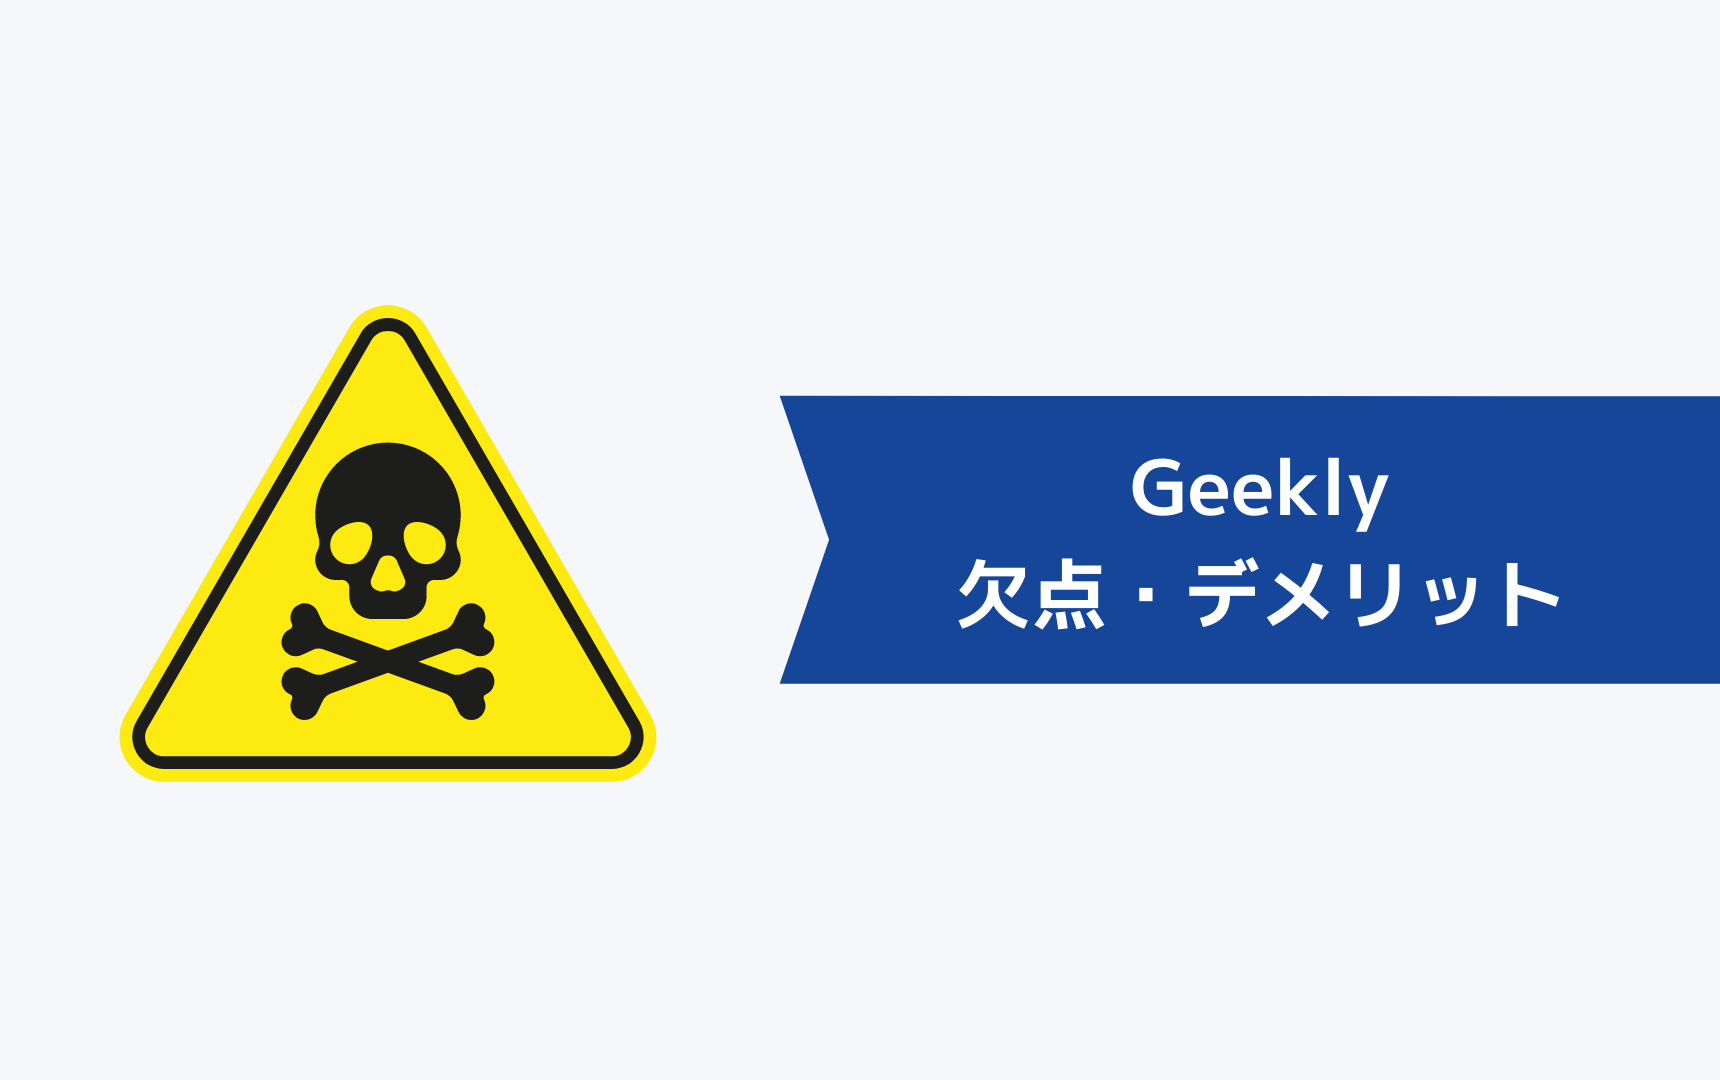 Geekly（ギークリー）の欠点・デメリット